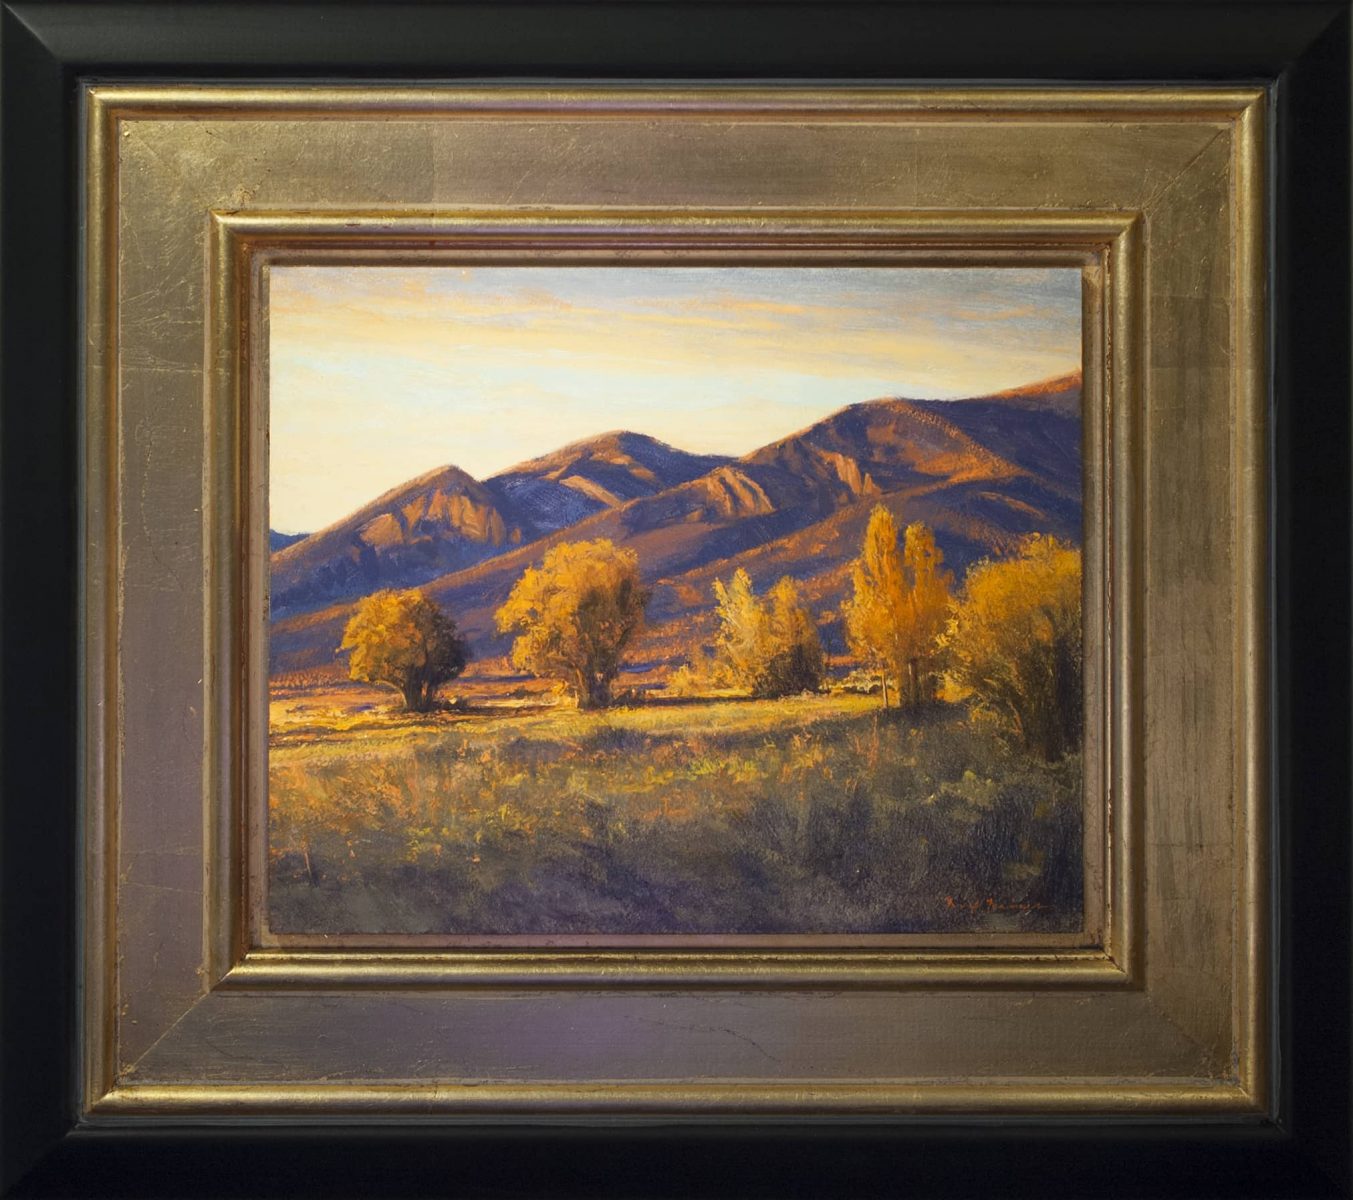 New Mexico landscape oil painting by Dix Baines